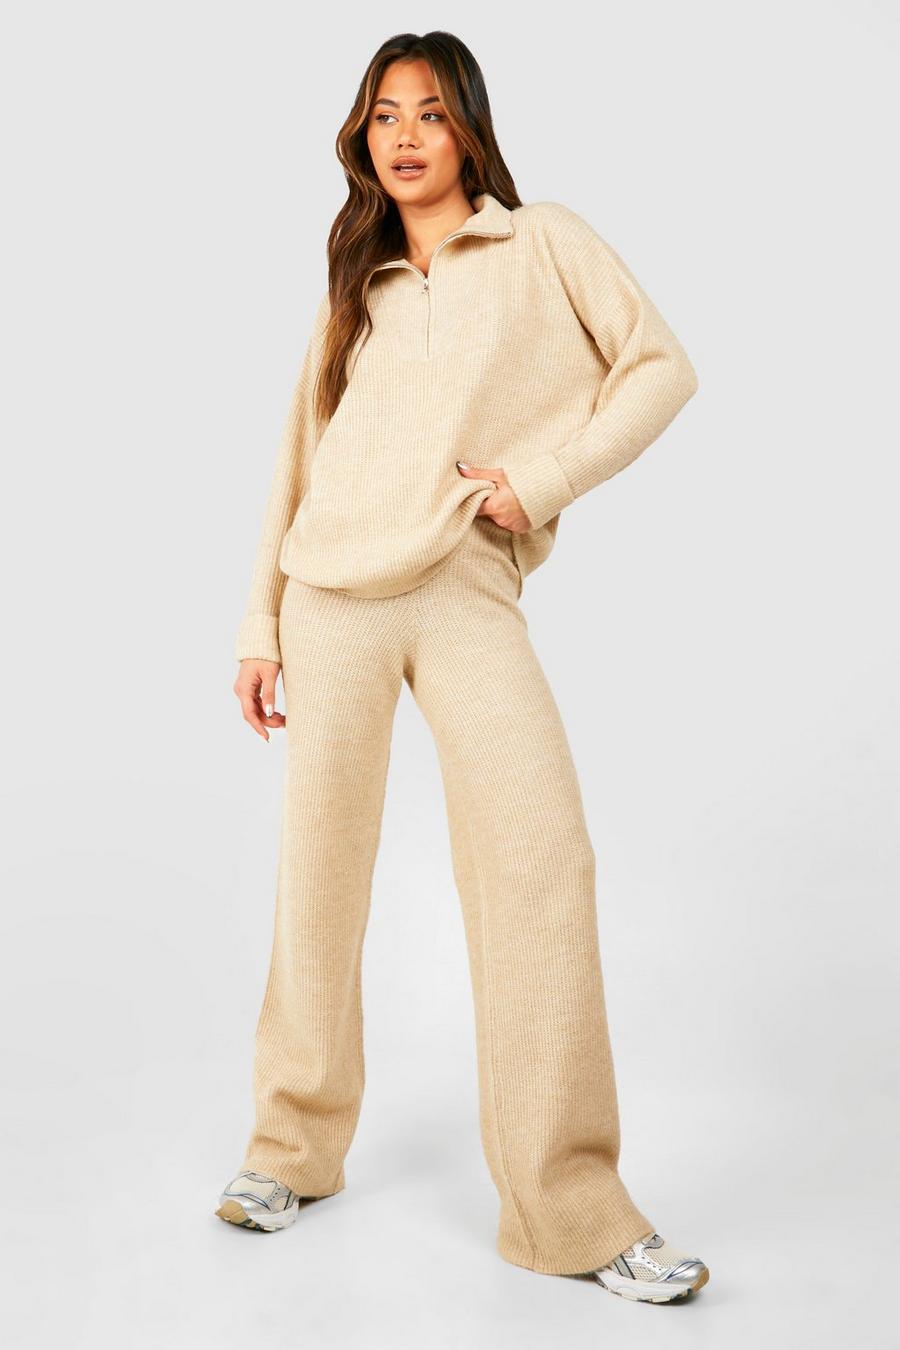 Stone Half Zip Funnel Neck And Wide Leg Pants Knitted Set